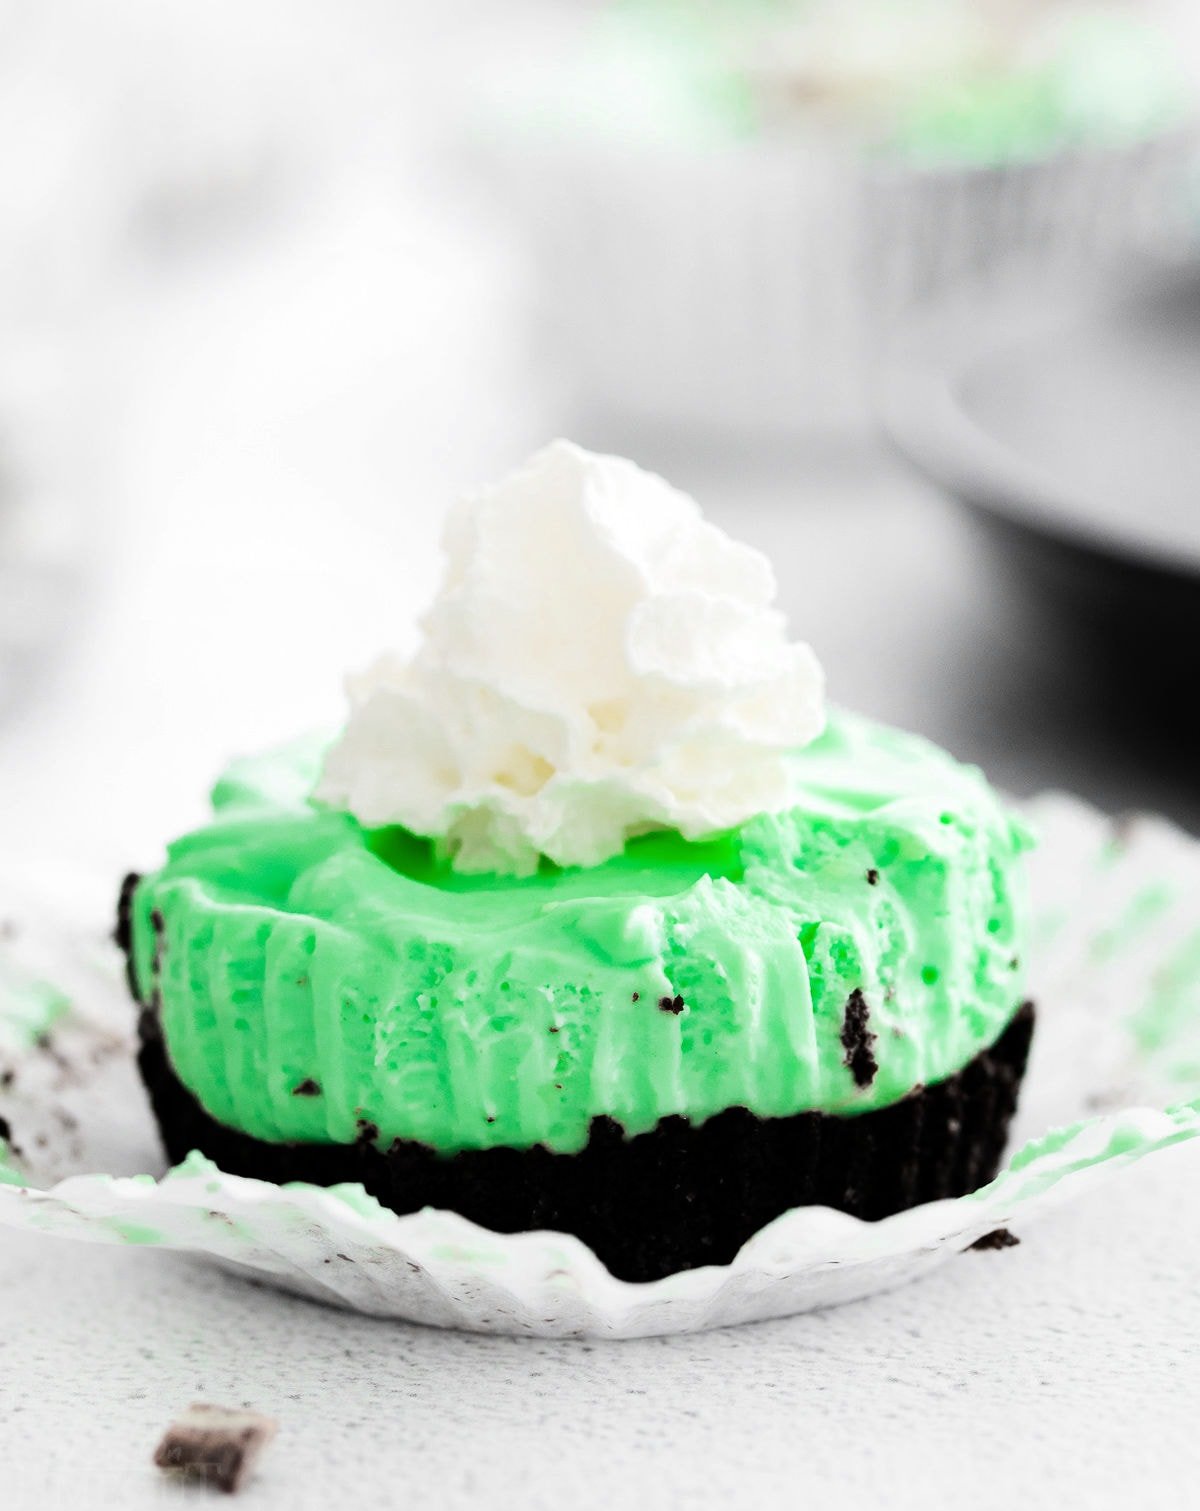 mini cheesecake flavored with creme de menthe liqueur with an oreo crust and topped with whipped cream.